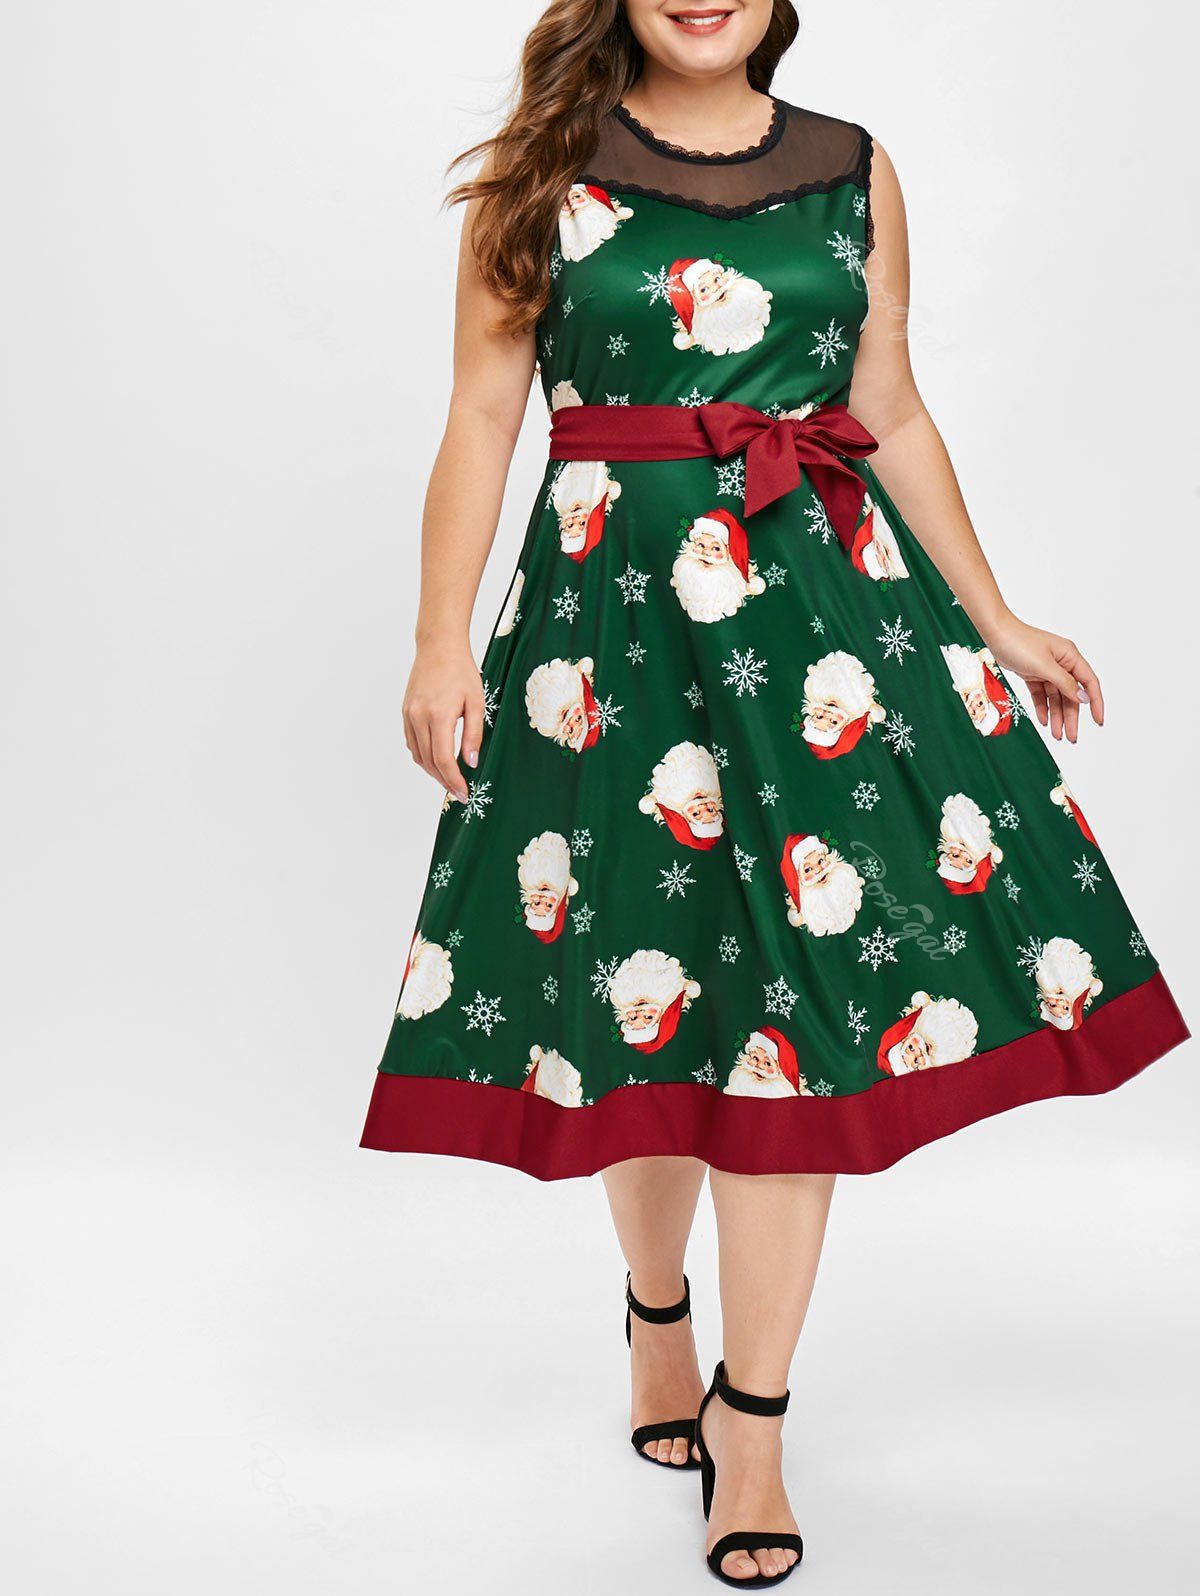 View Plus Size Christmas Dress Pictures